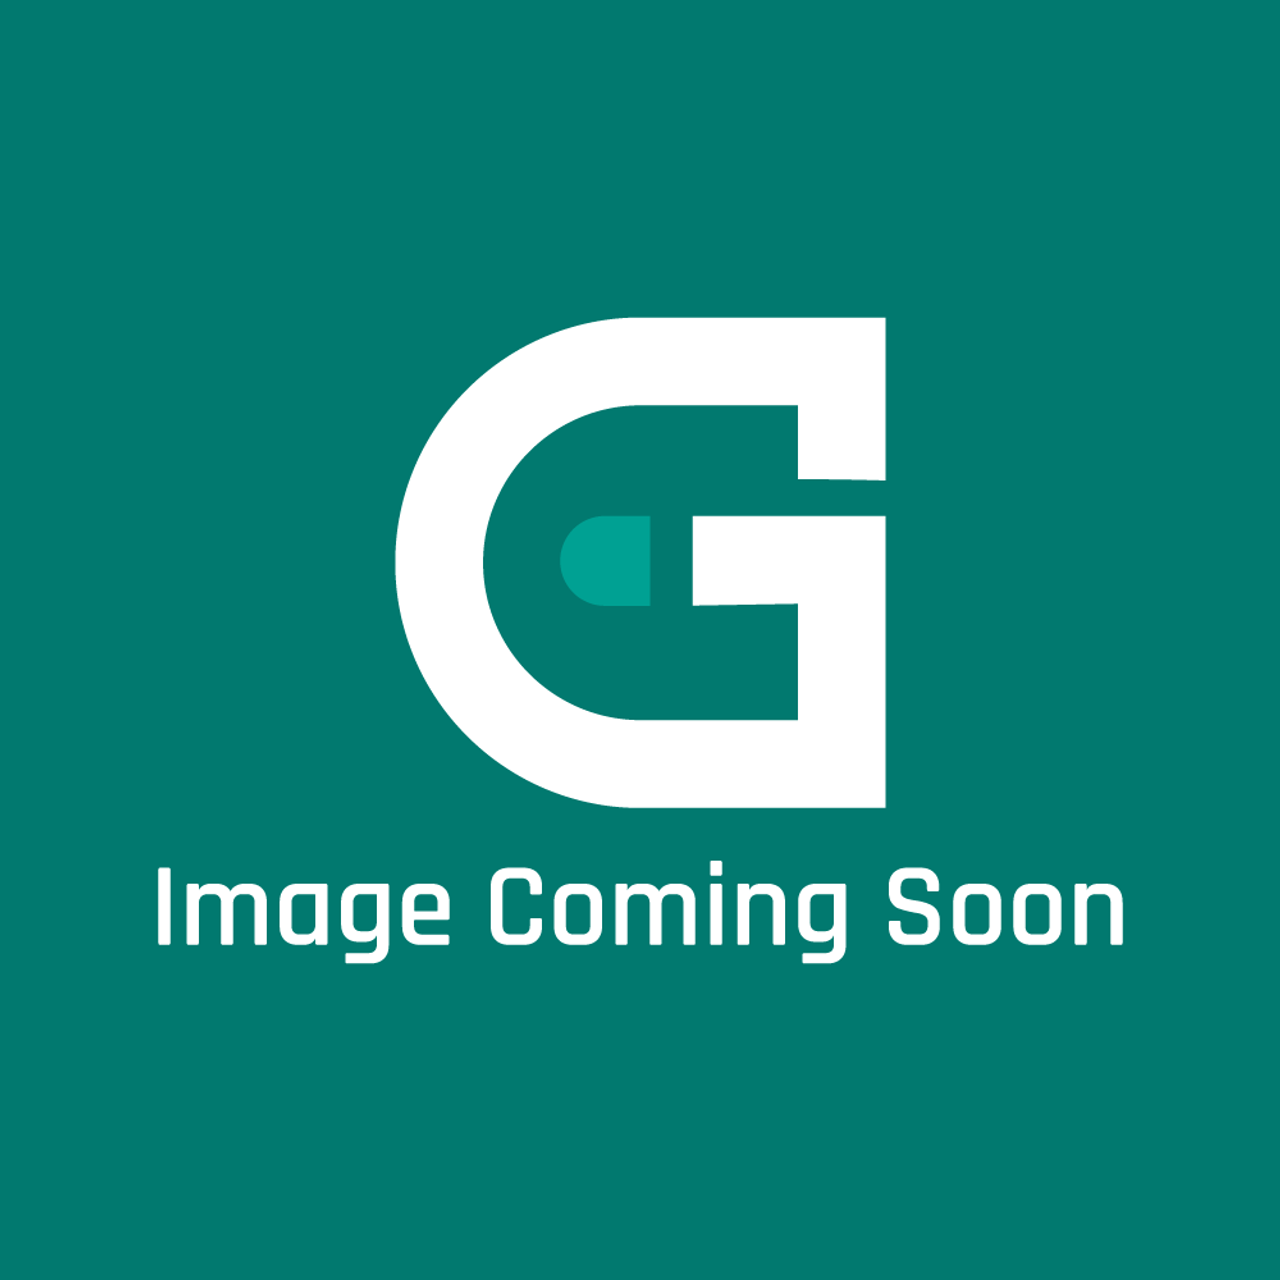 AGA Marvel AG4M250941 - T/Couple Jack Con & Gasket 4-2 / 6-4 - Image Coming Soon!